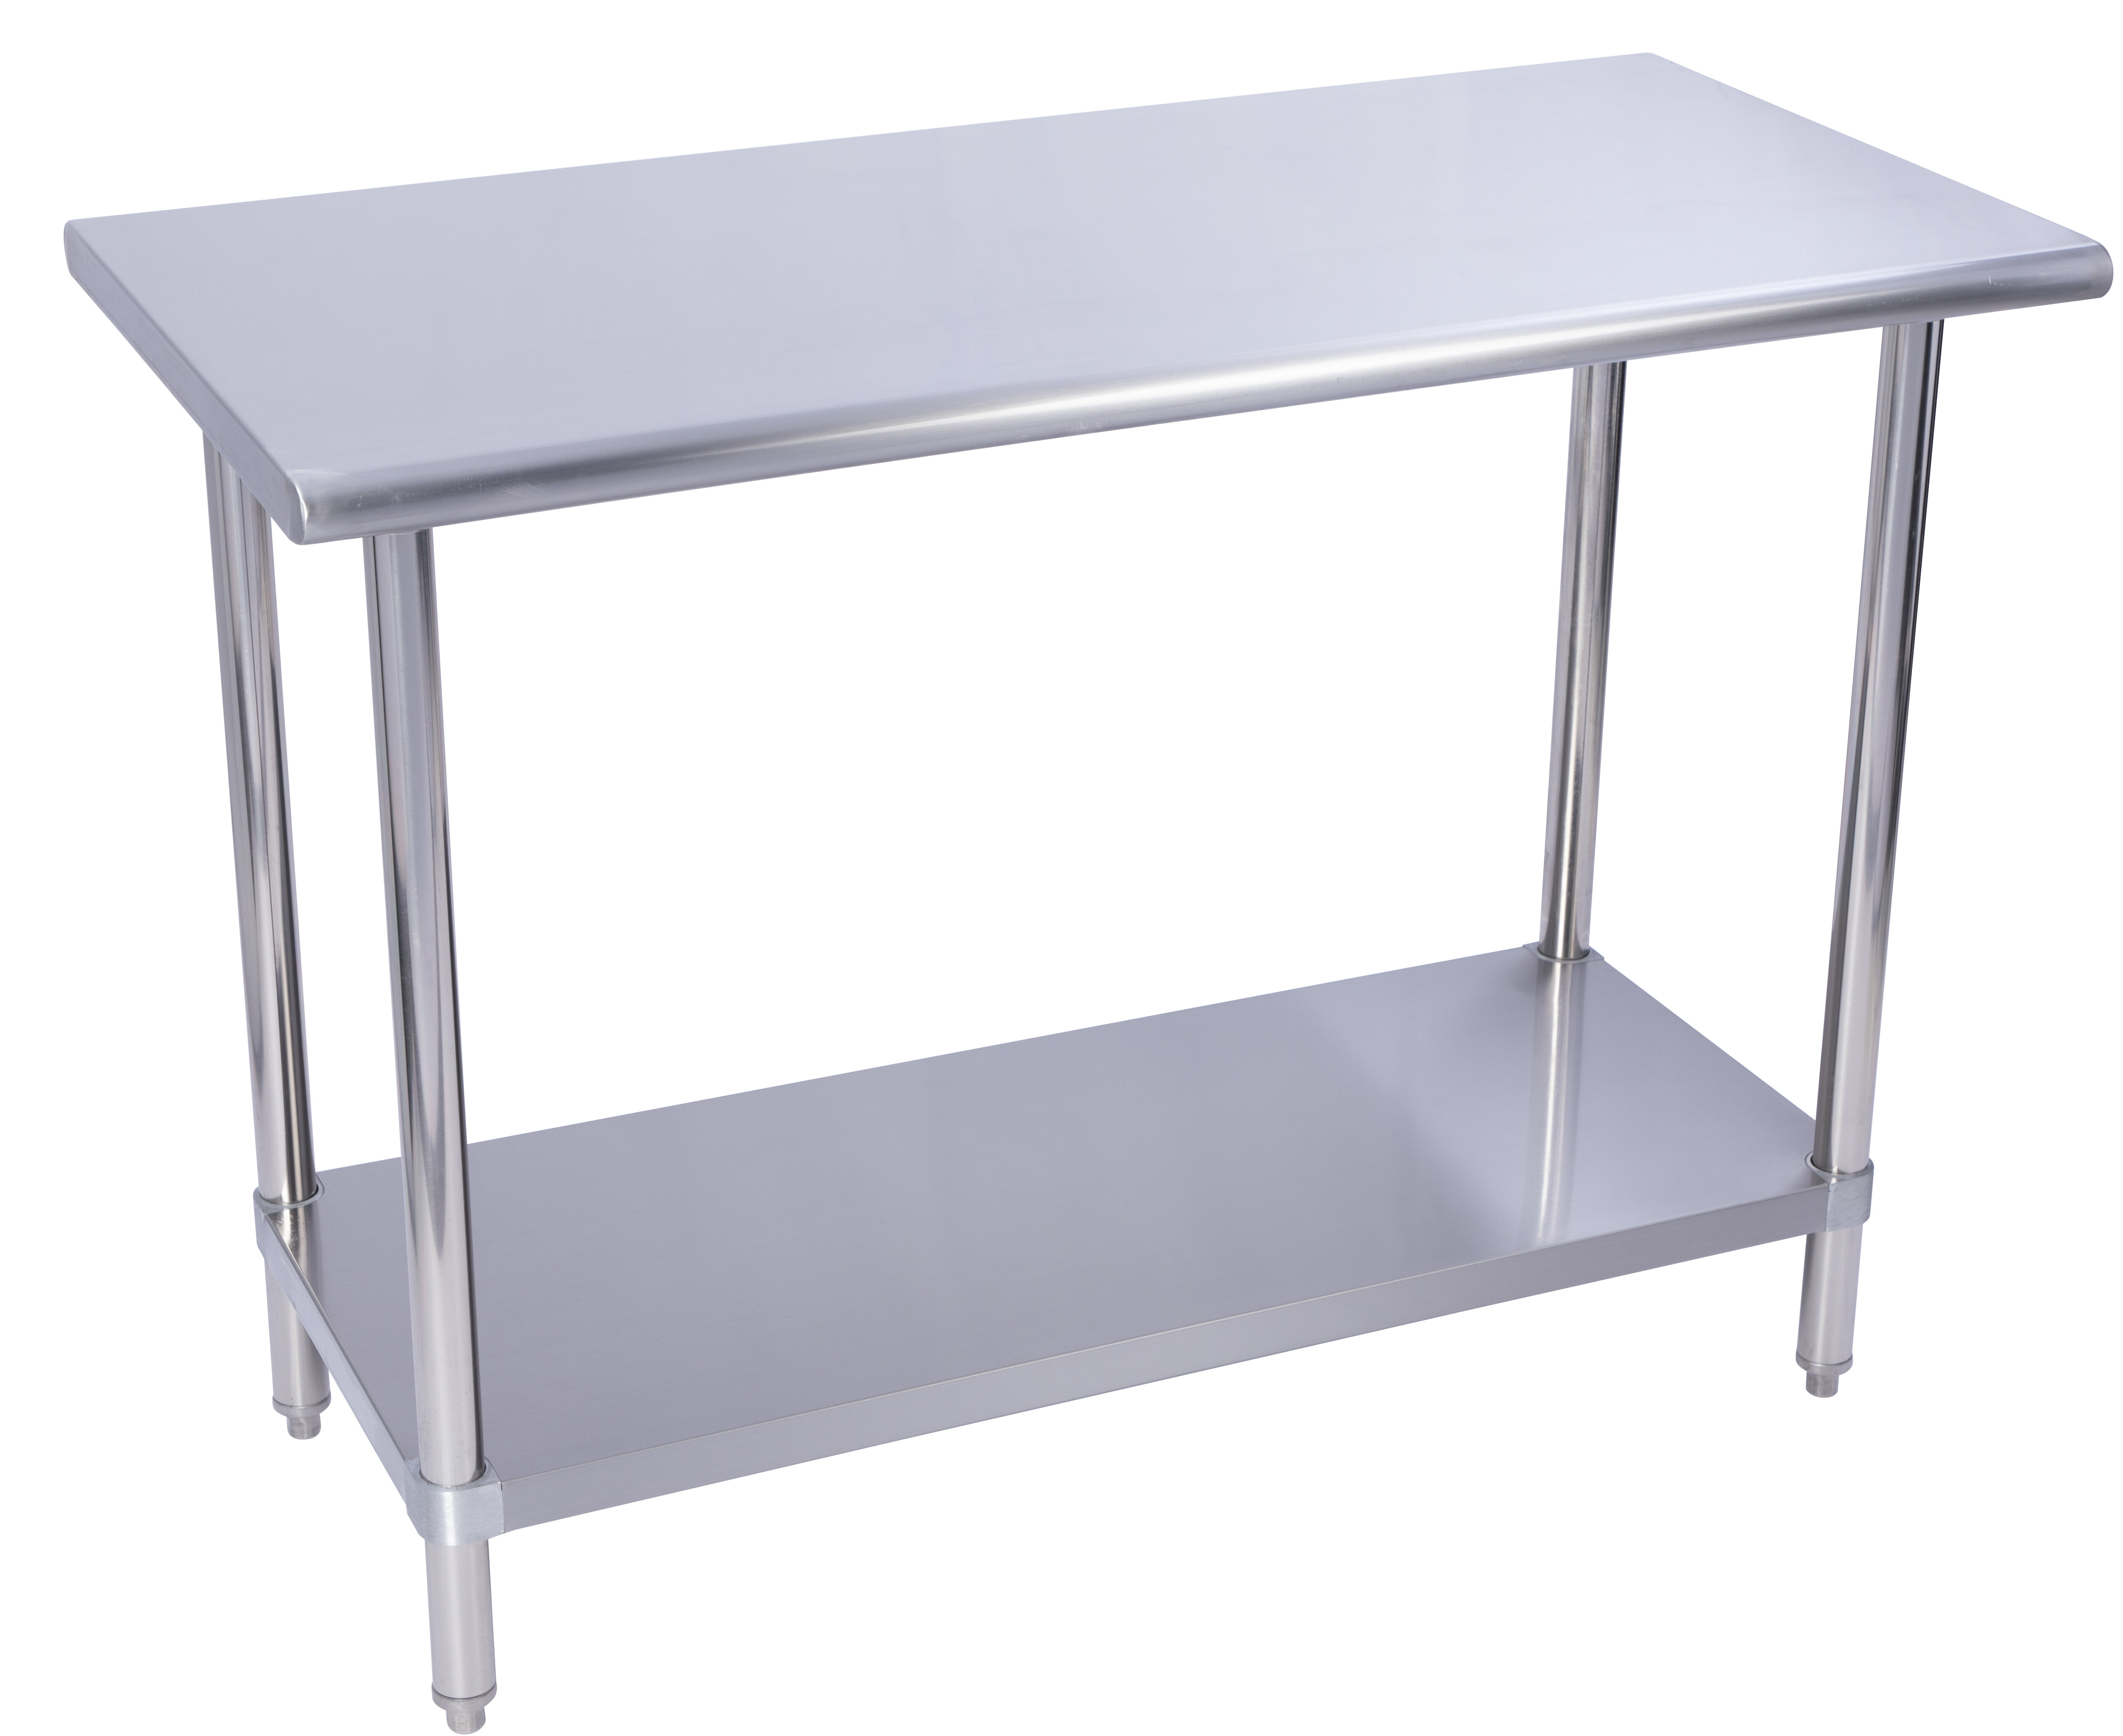 NSF Certified with Undershelf AmGood Stainless Steel Equipment Stand Heavy Duty Commercial Grade 24 Width x 48 Length